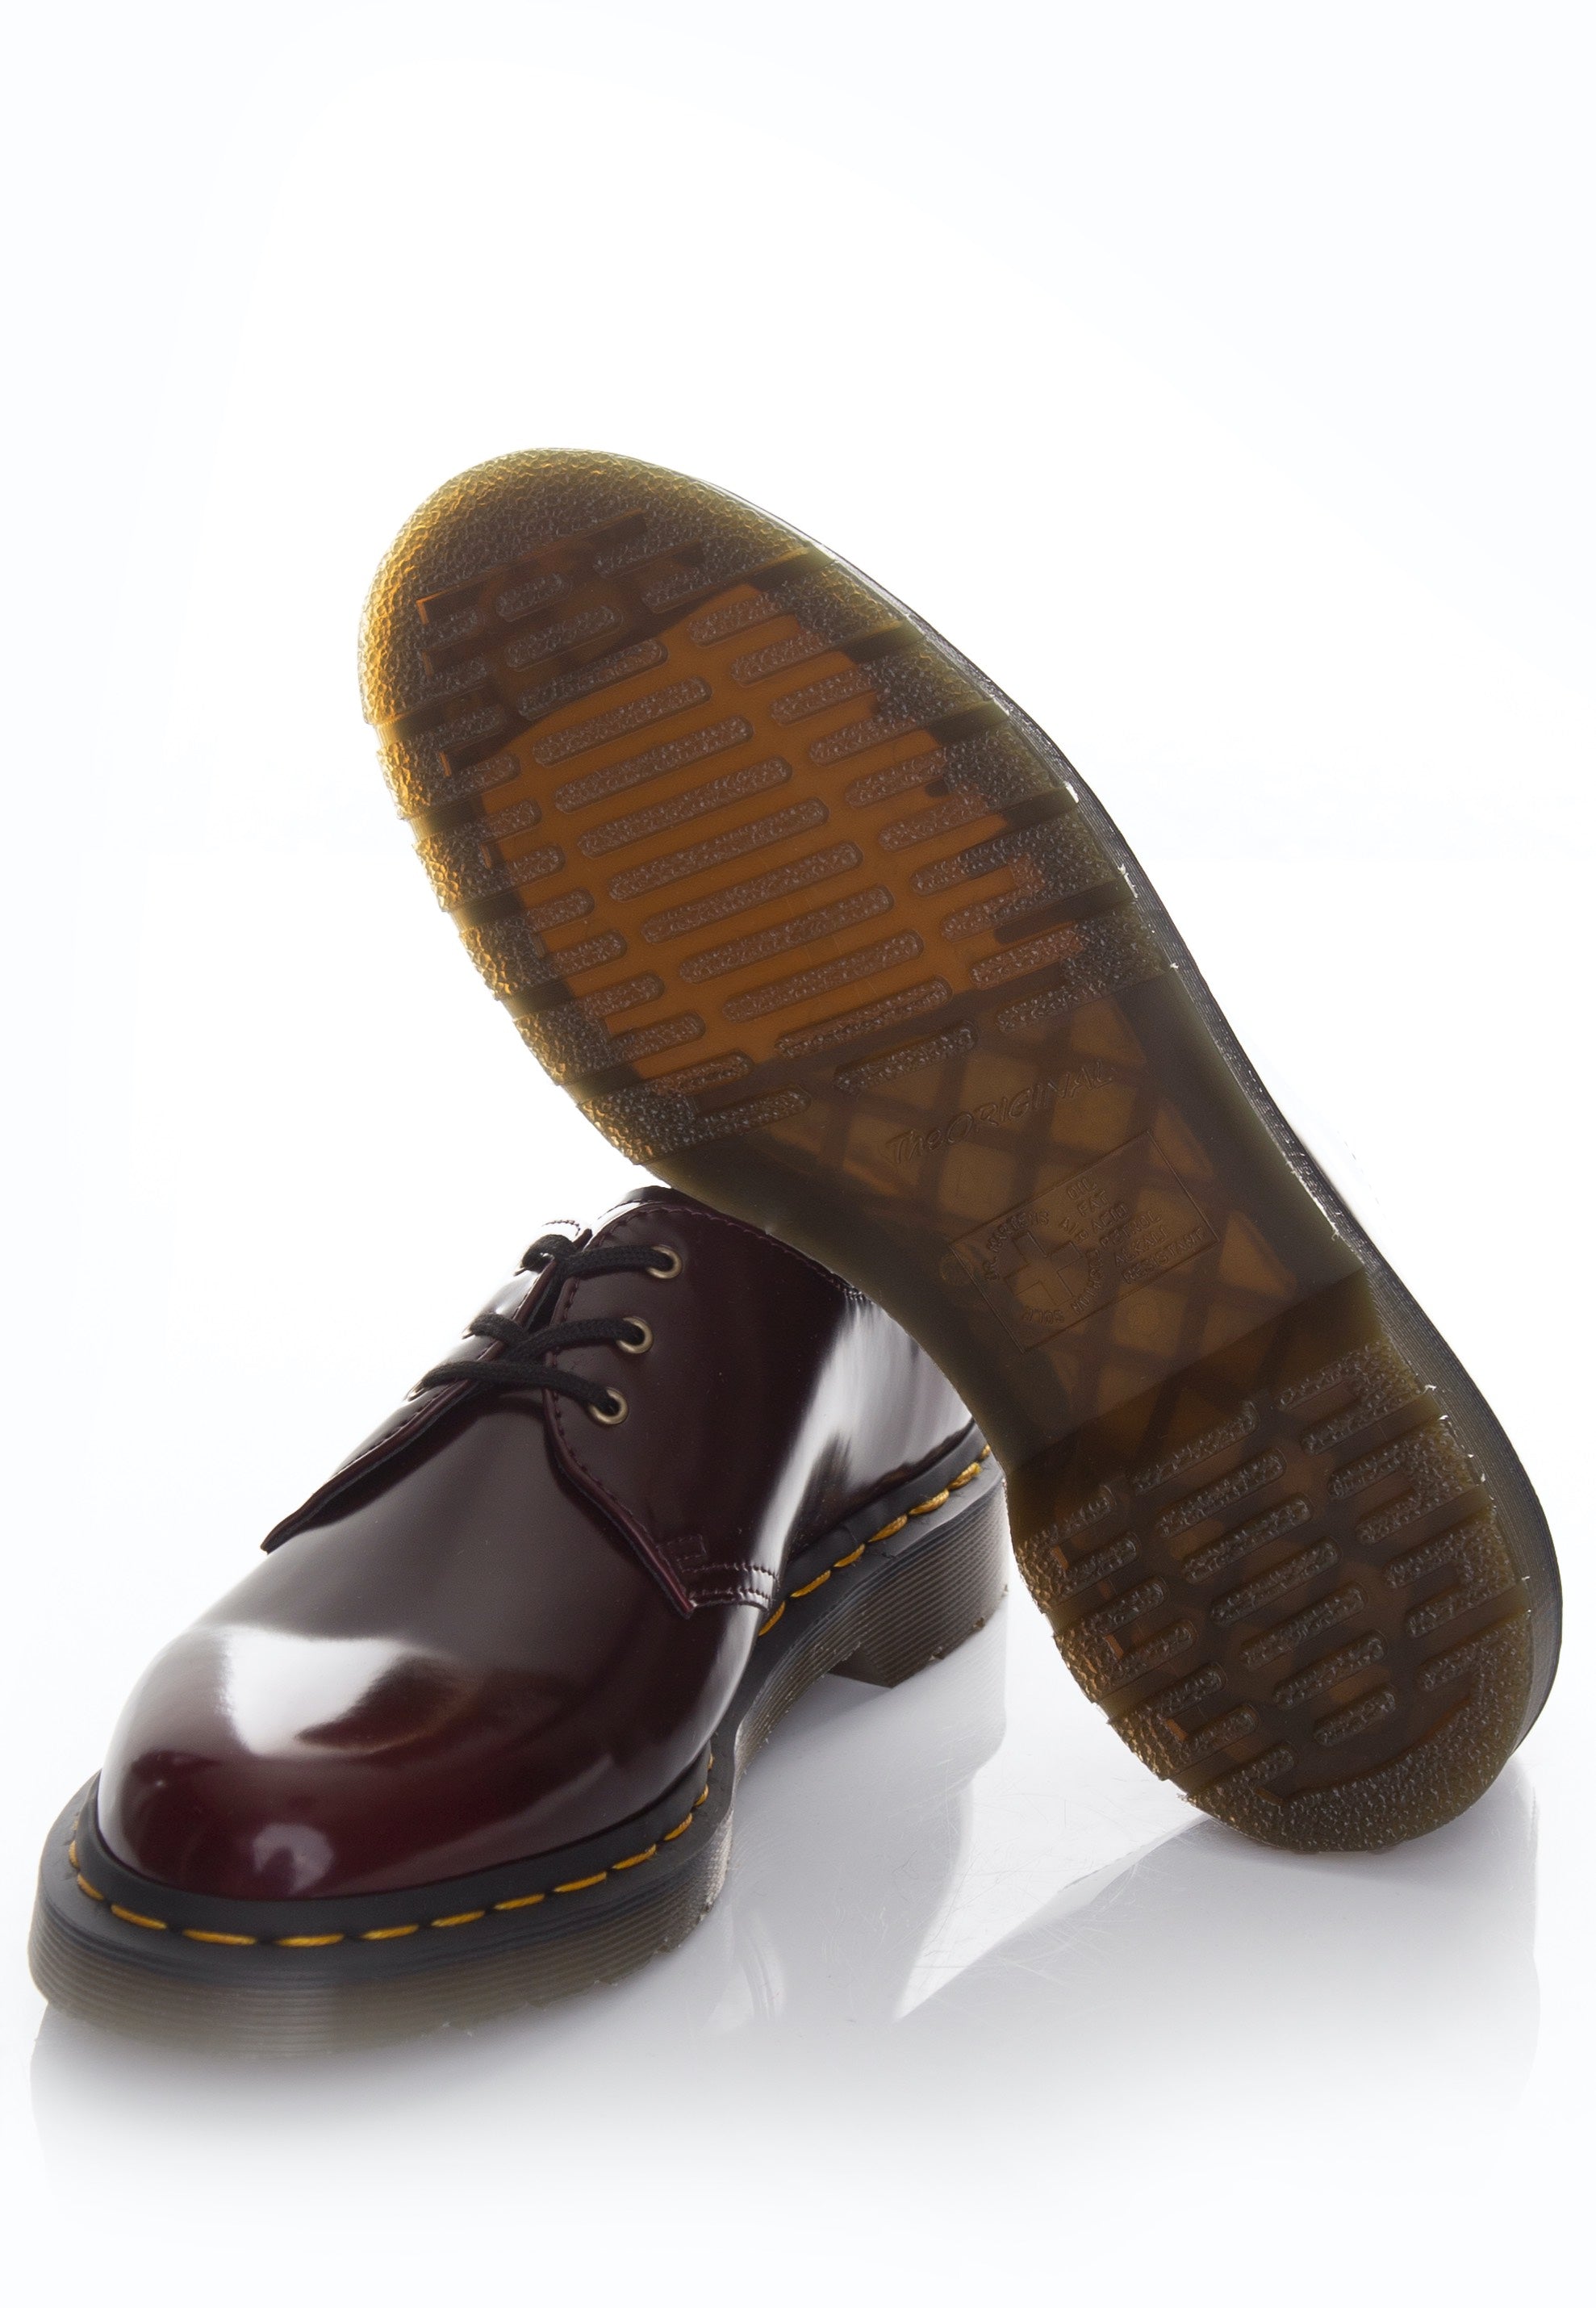 Dr. Martens - Vegan 1461 Cherry Red Oxford Rub Off - Shoes